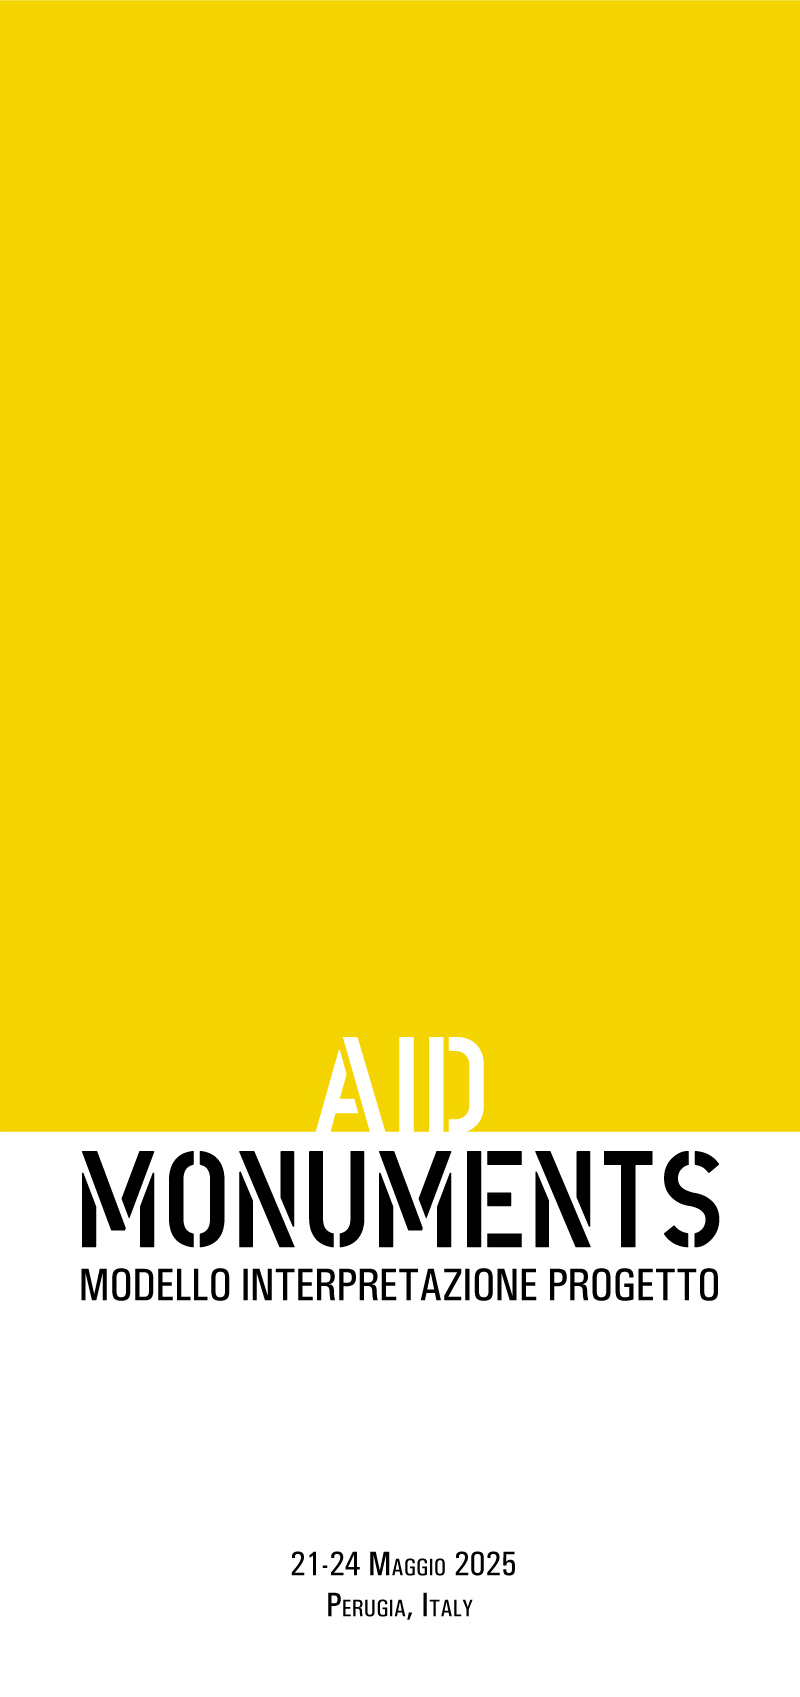 AID MONUMENTS